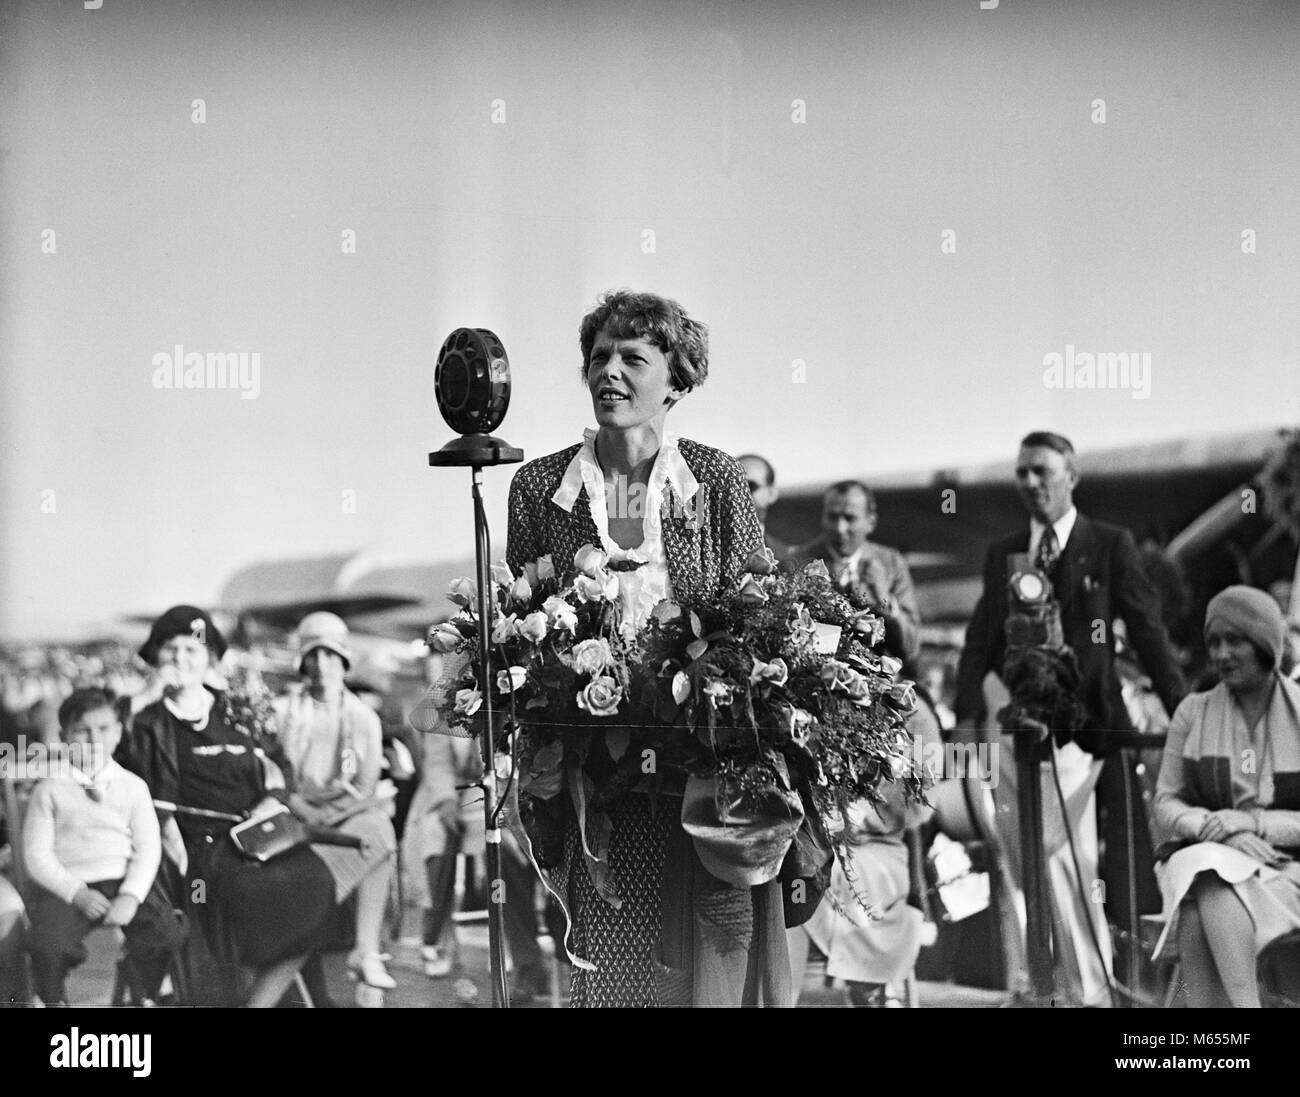 1920s 1929 AVIATOR AVIATRIX AMELIA EARHART SPEAKING TO CROWD HOLDING BOUQUET OF FLOWERS - asp gp74 ASP001 HARS B&W BLACK AND WHITE CAUCASIAN ETHNICITY EARHART GLENDALE AIRPORT JULY 7 OCCUPATIONS OLD FASHIONED PERSONS PUBLIC SPEAKING Stock Photo